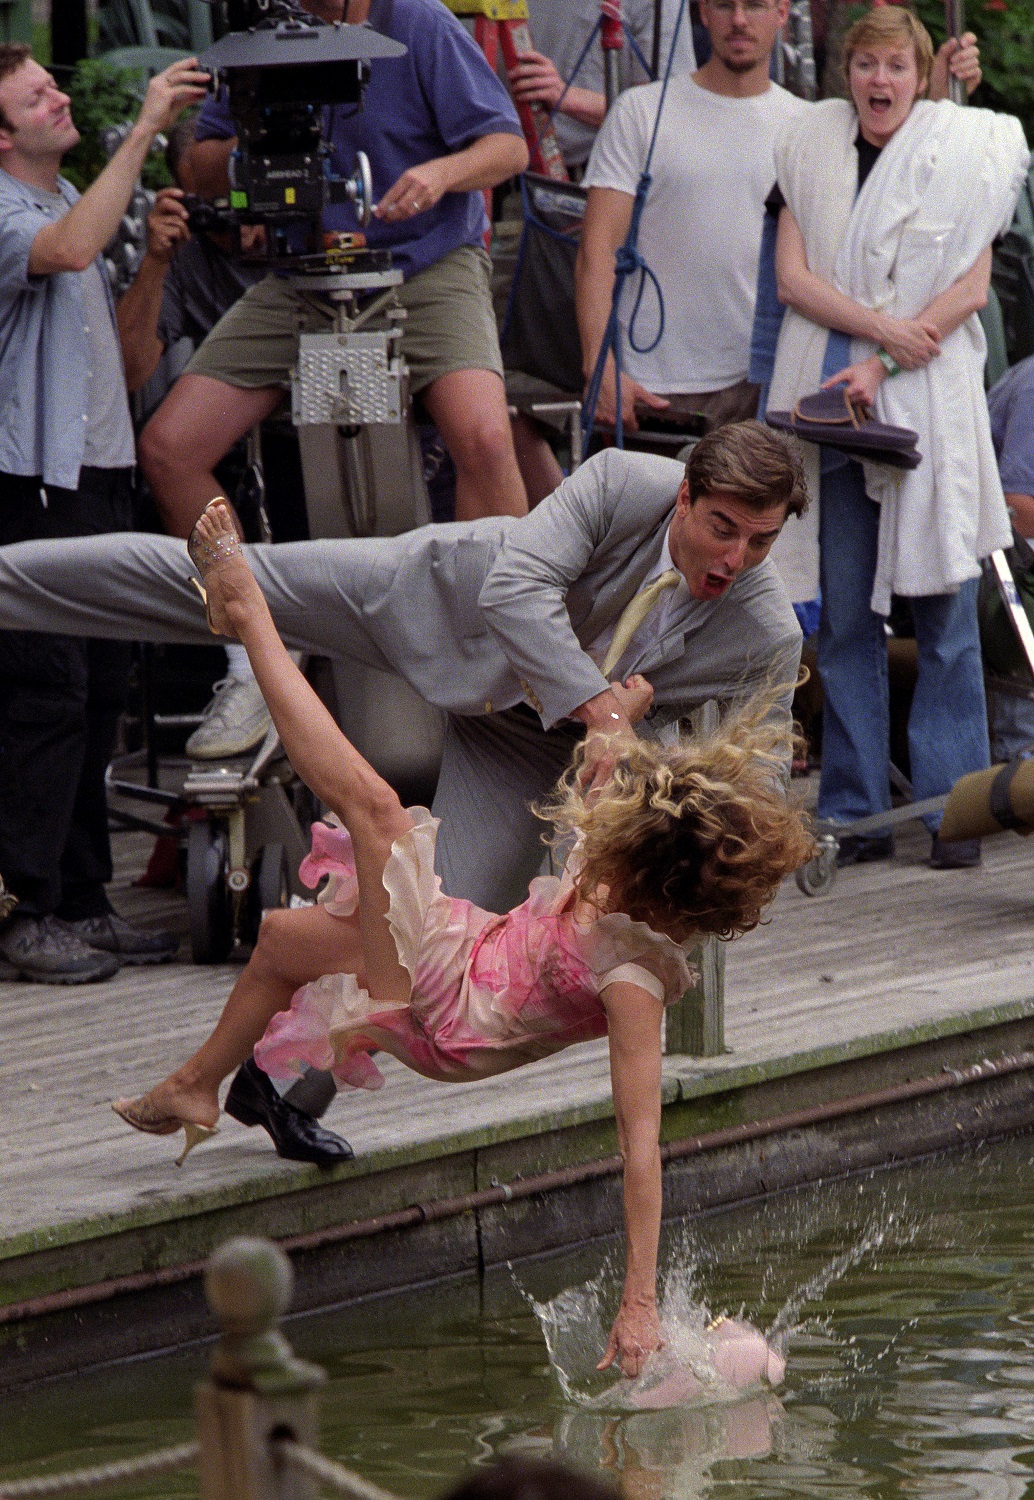 Sarah Jessica Parker as Carrie Bradshaw and Chris Noth as Mr. Big fall into Central Park Lake while filming a season 3 scene for 'Sex and the City'